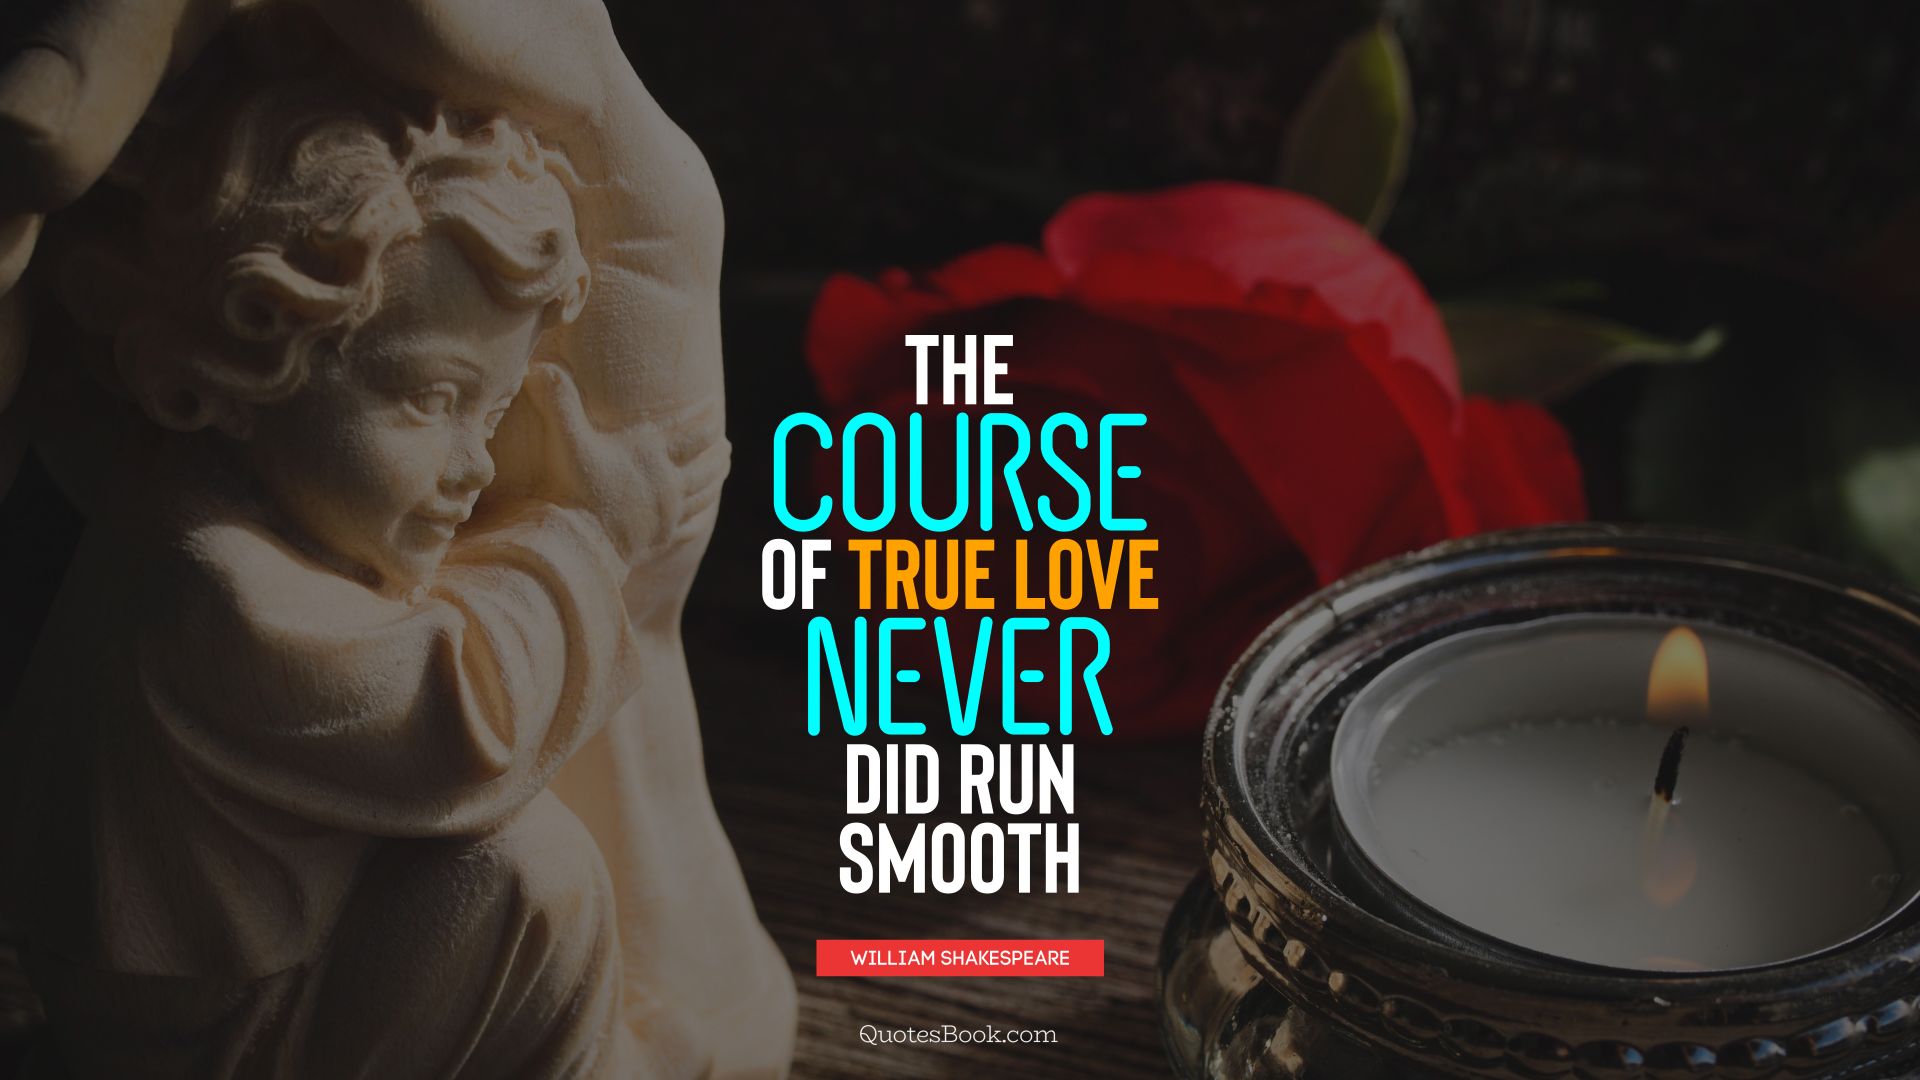 The course of true love never did run smooth. - Quote by William Shakespeare